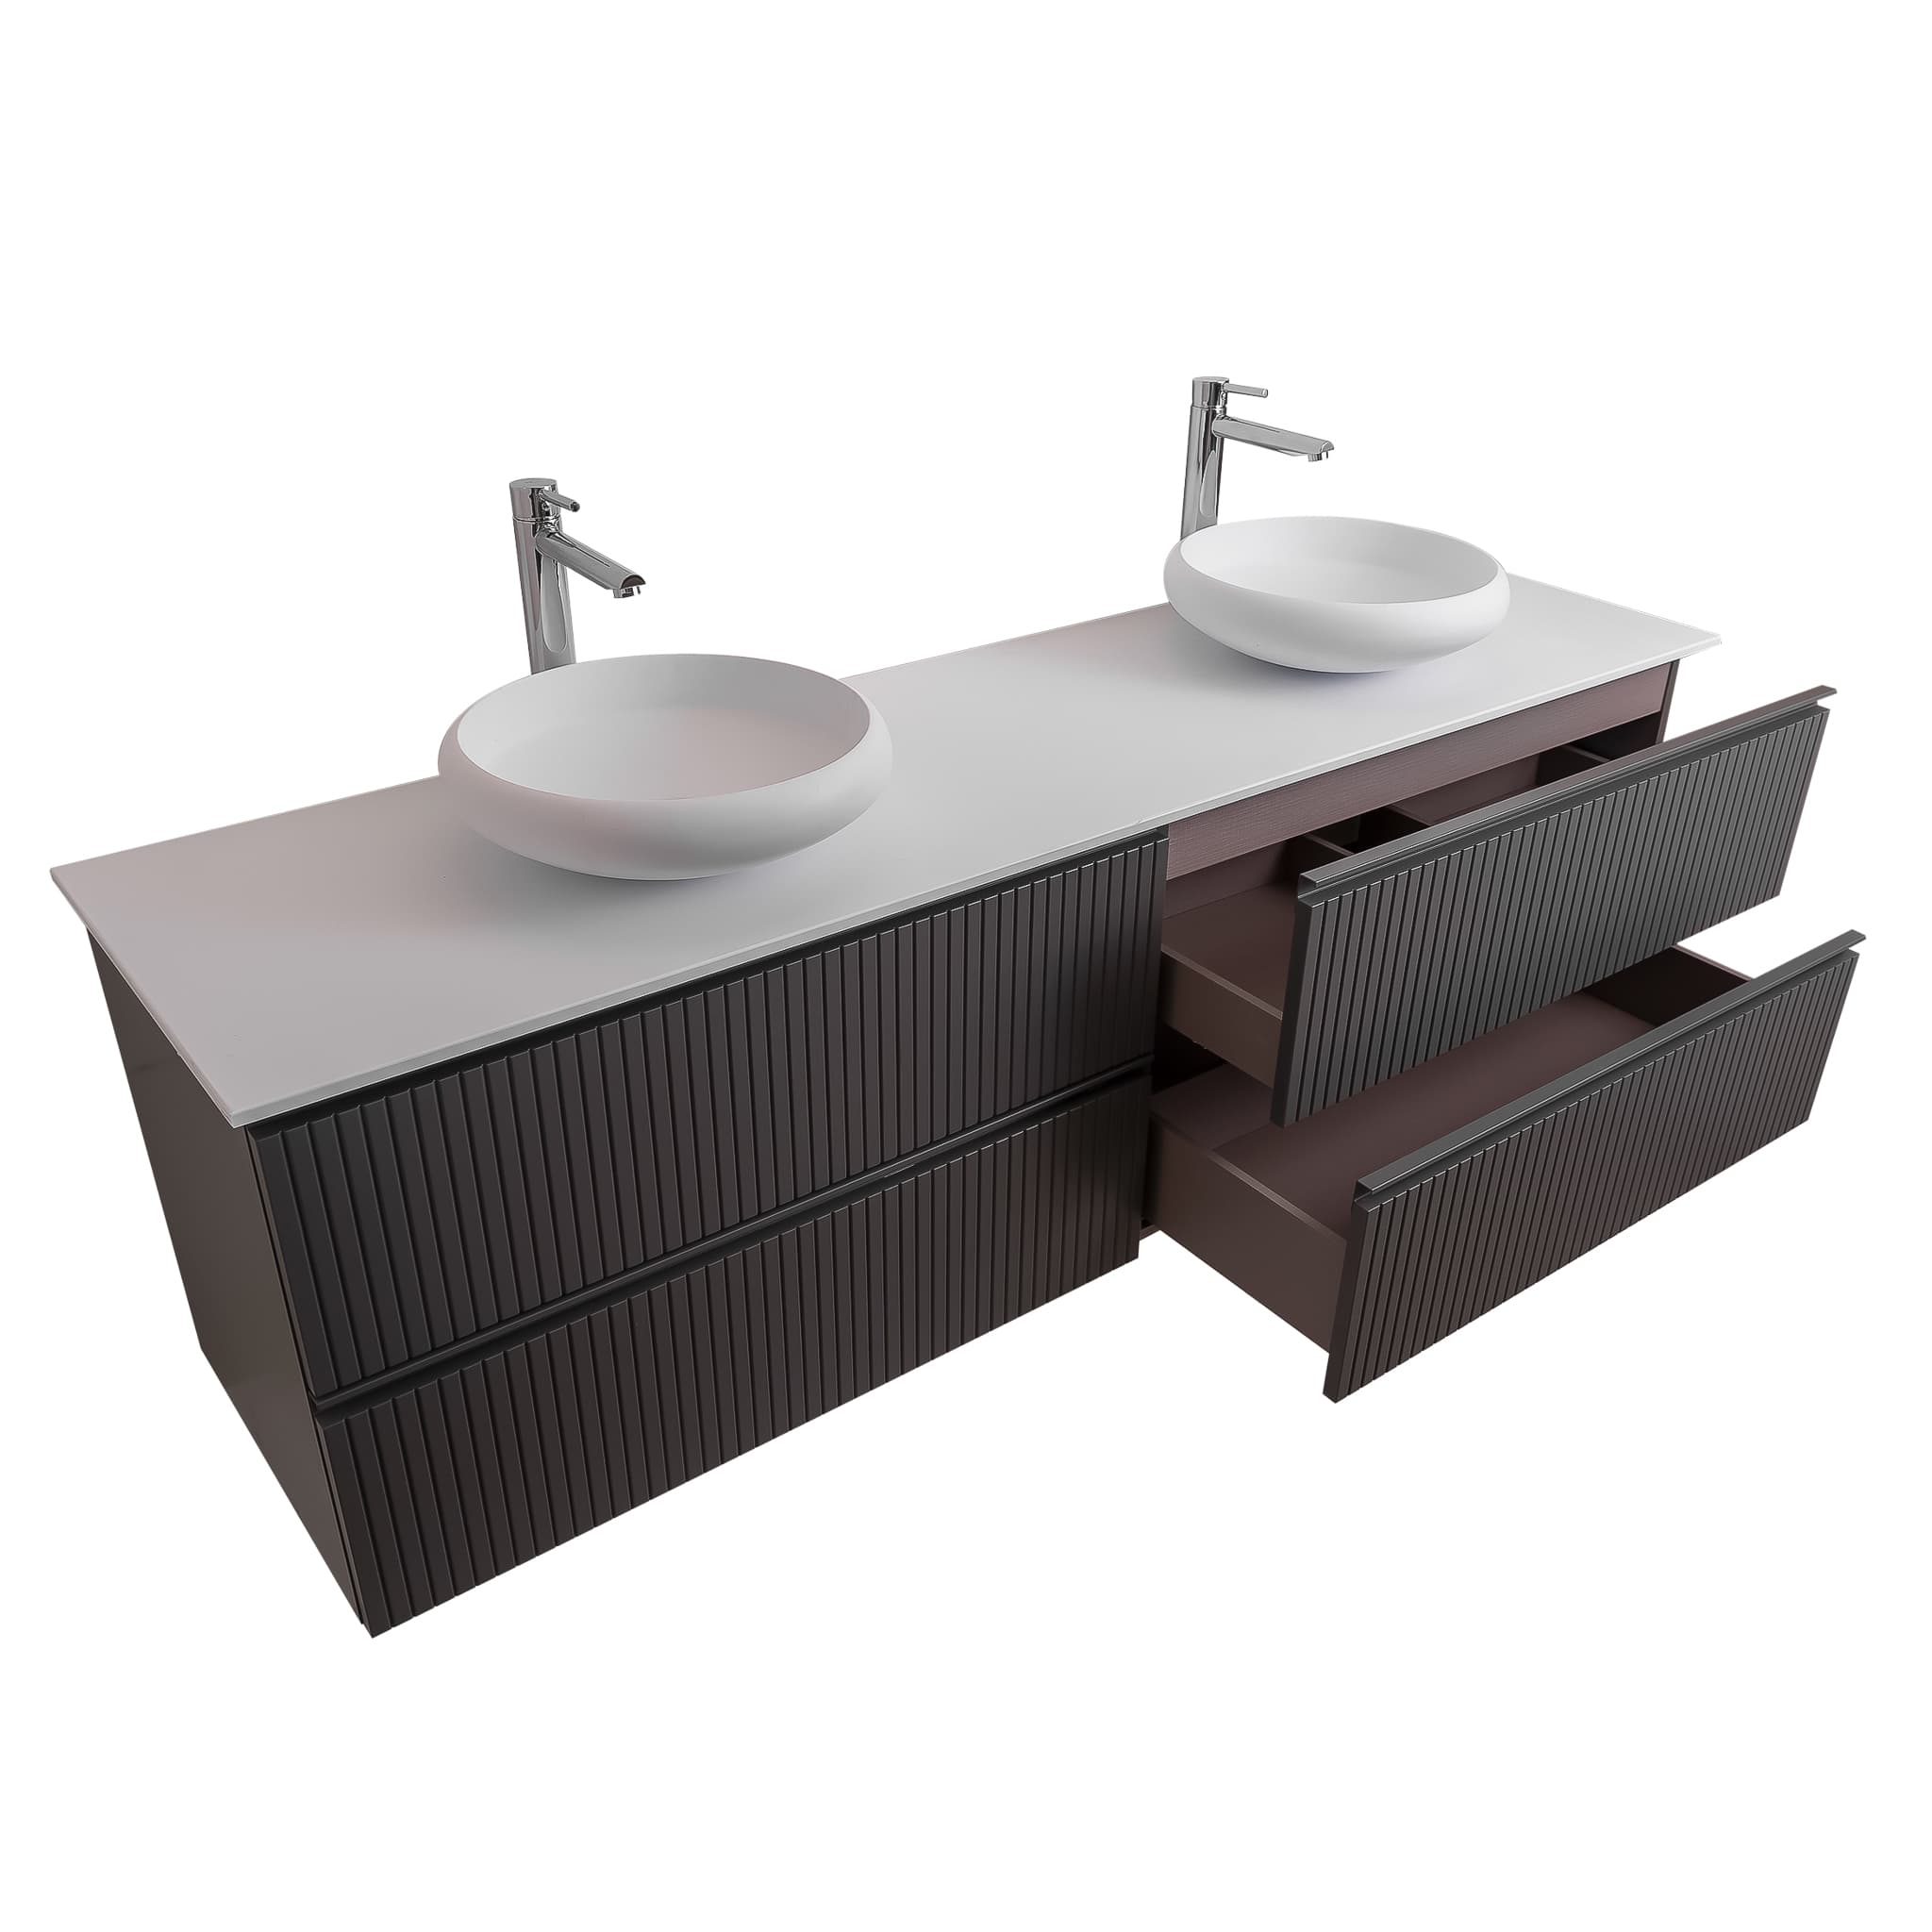 Ares 63 Matte Grey Cabinet, Solid Surface Flat White Counter And Two Round Solid Surface White Basin 1153, Wall Mounted Modern Vanity Set